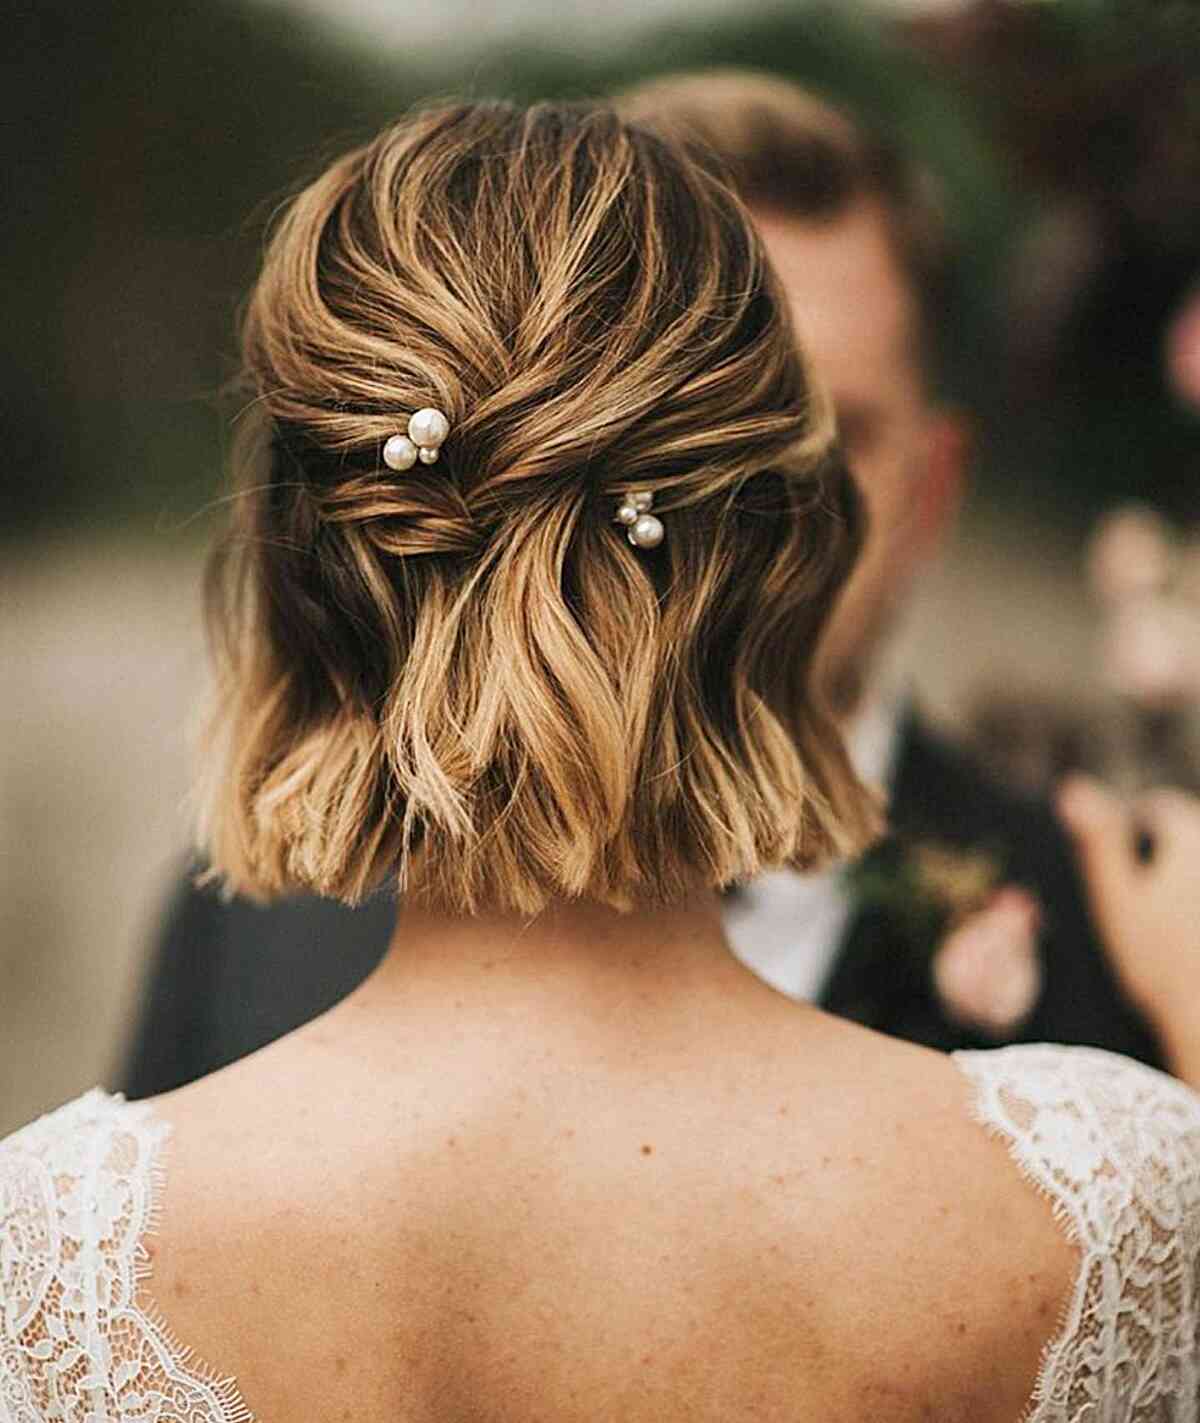 5 Quick And Easy Hairstyles For Romantic Valentine's Day Date